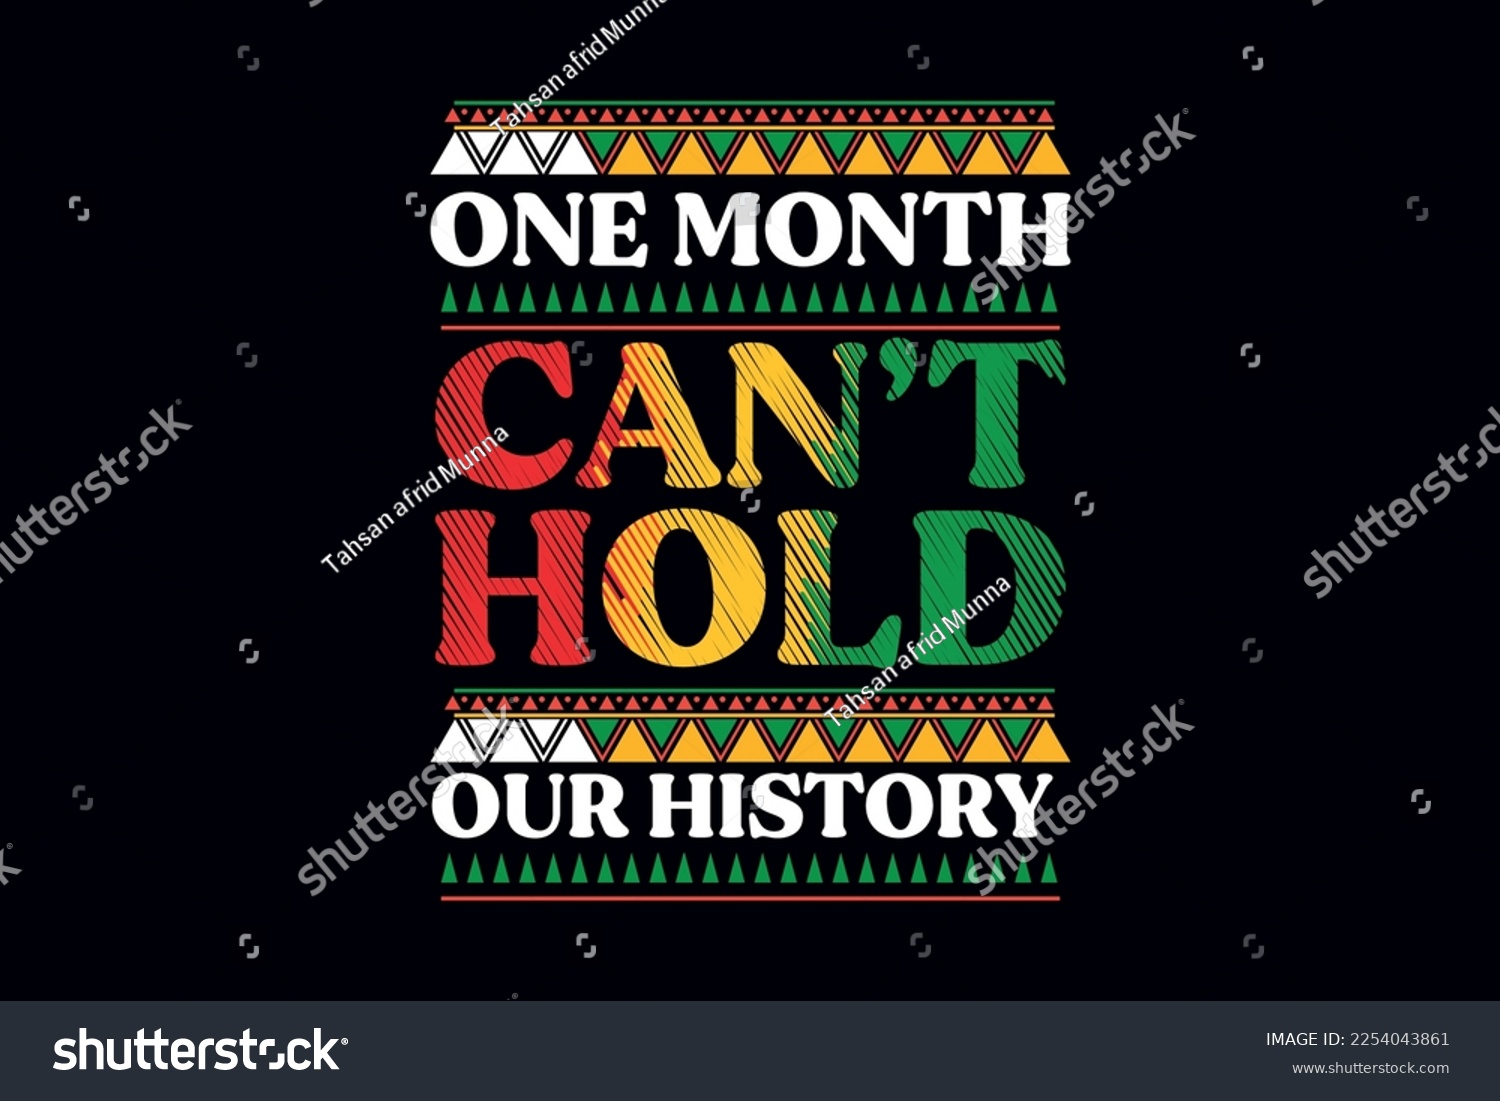 SVG of One Month Can't hold Our history SVG Black Month History Quote T Shirt Design svg